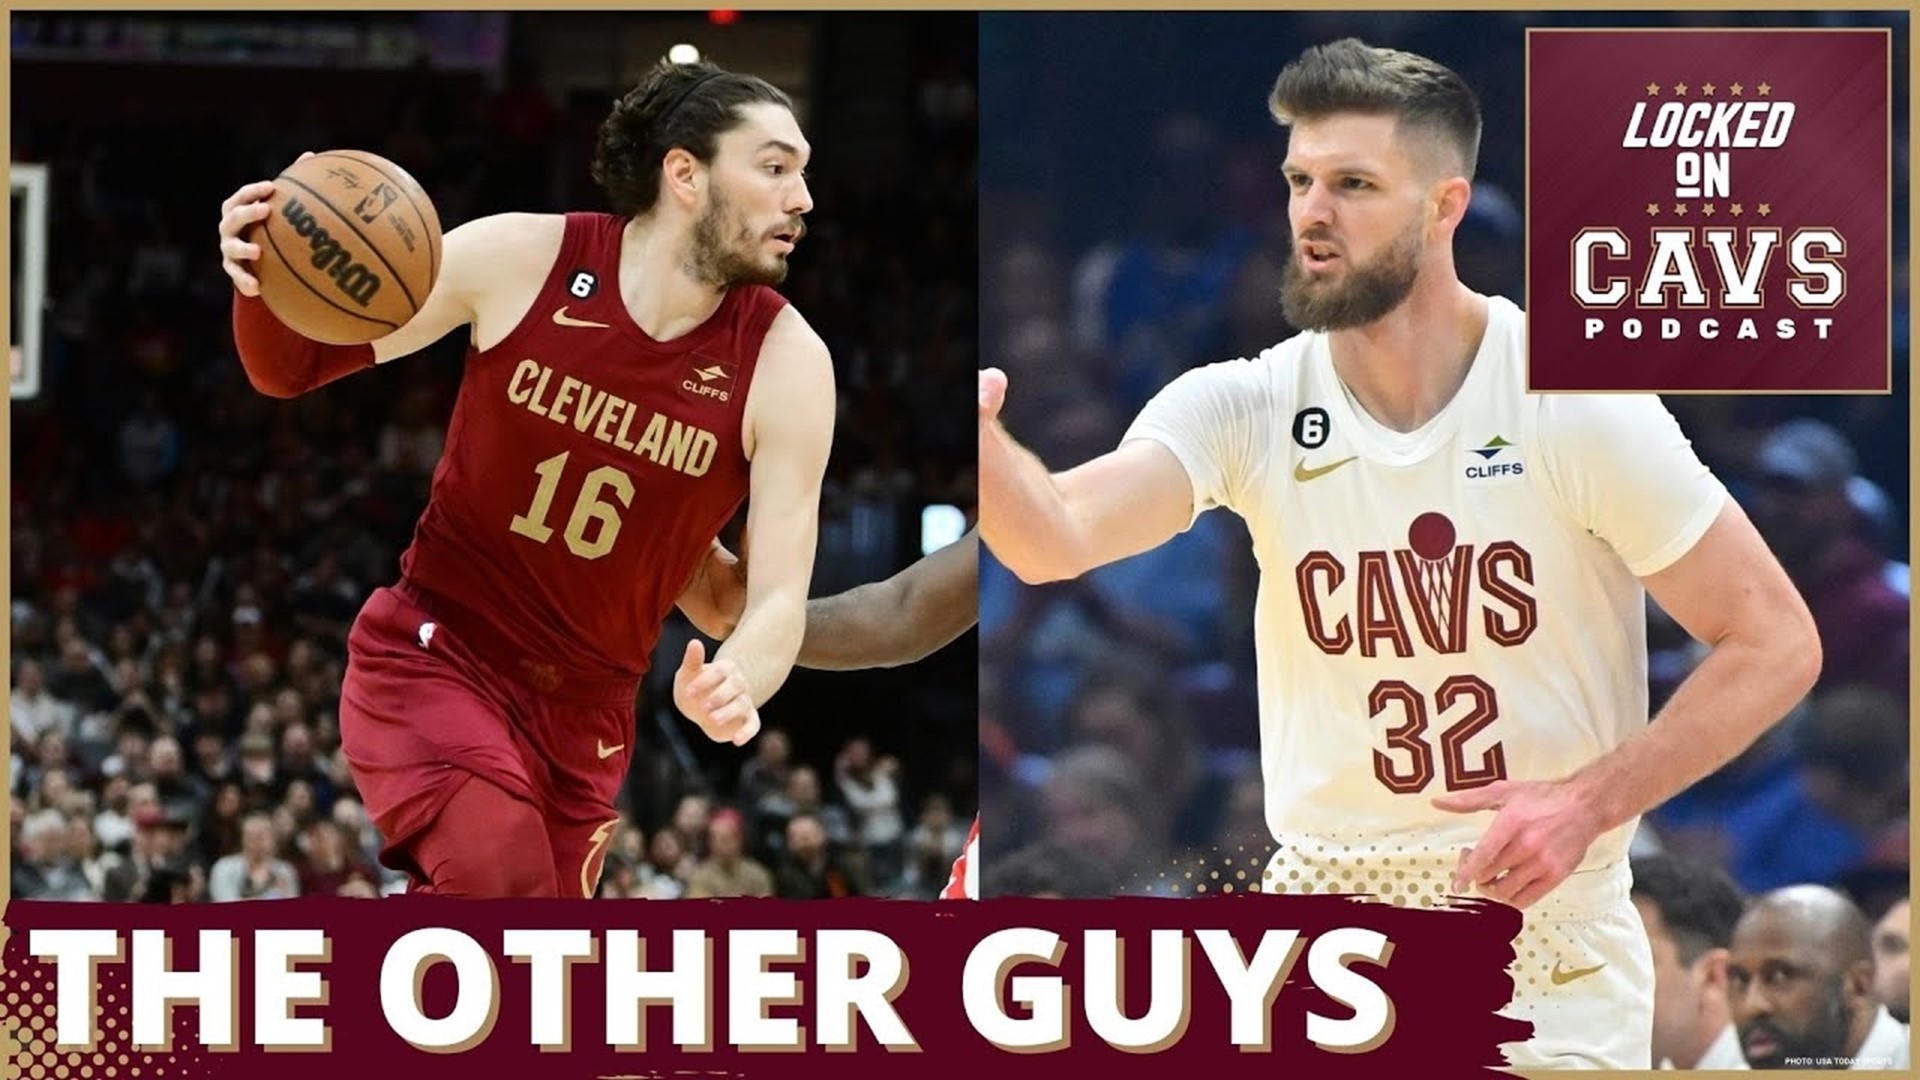 Chris and Evan talk about three Cavs forwards who the team needed more from last season and likely need to upgrade on in the future